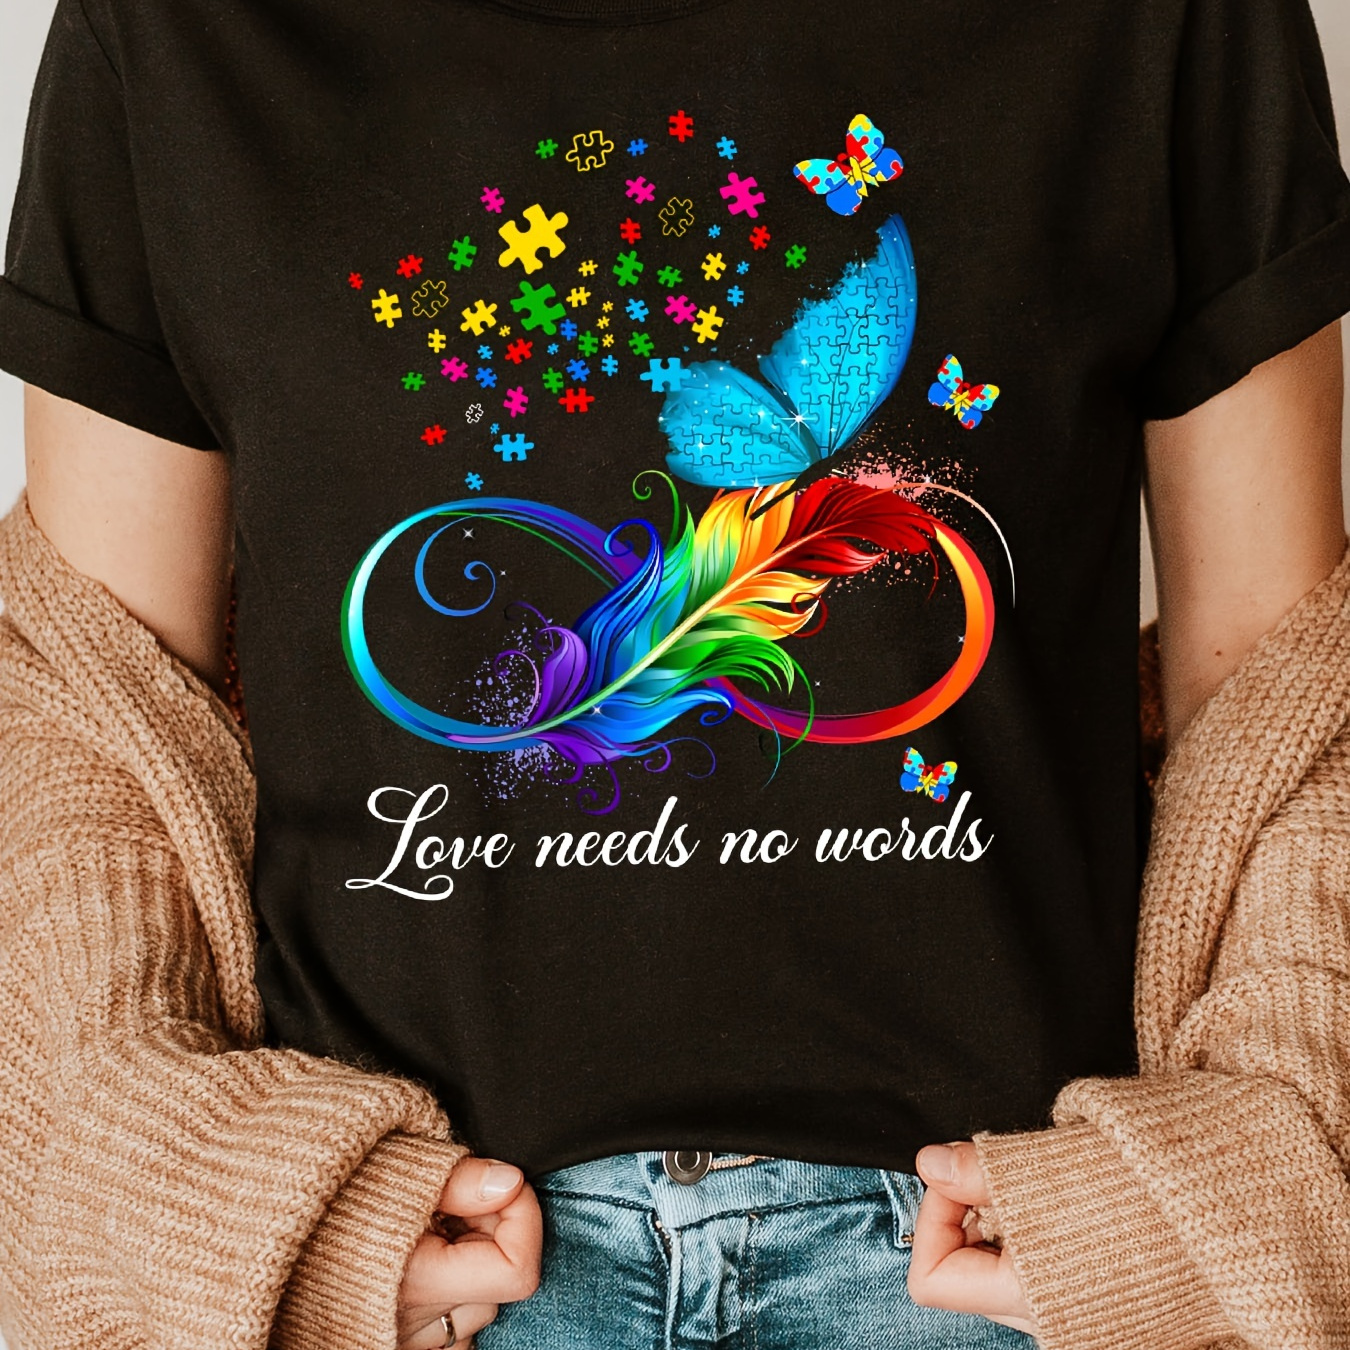 

Autism Awareness Print Crew Neck T-shirt, Short Sleeve Casual Top For Summer & Spring, Women's Clothing